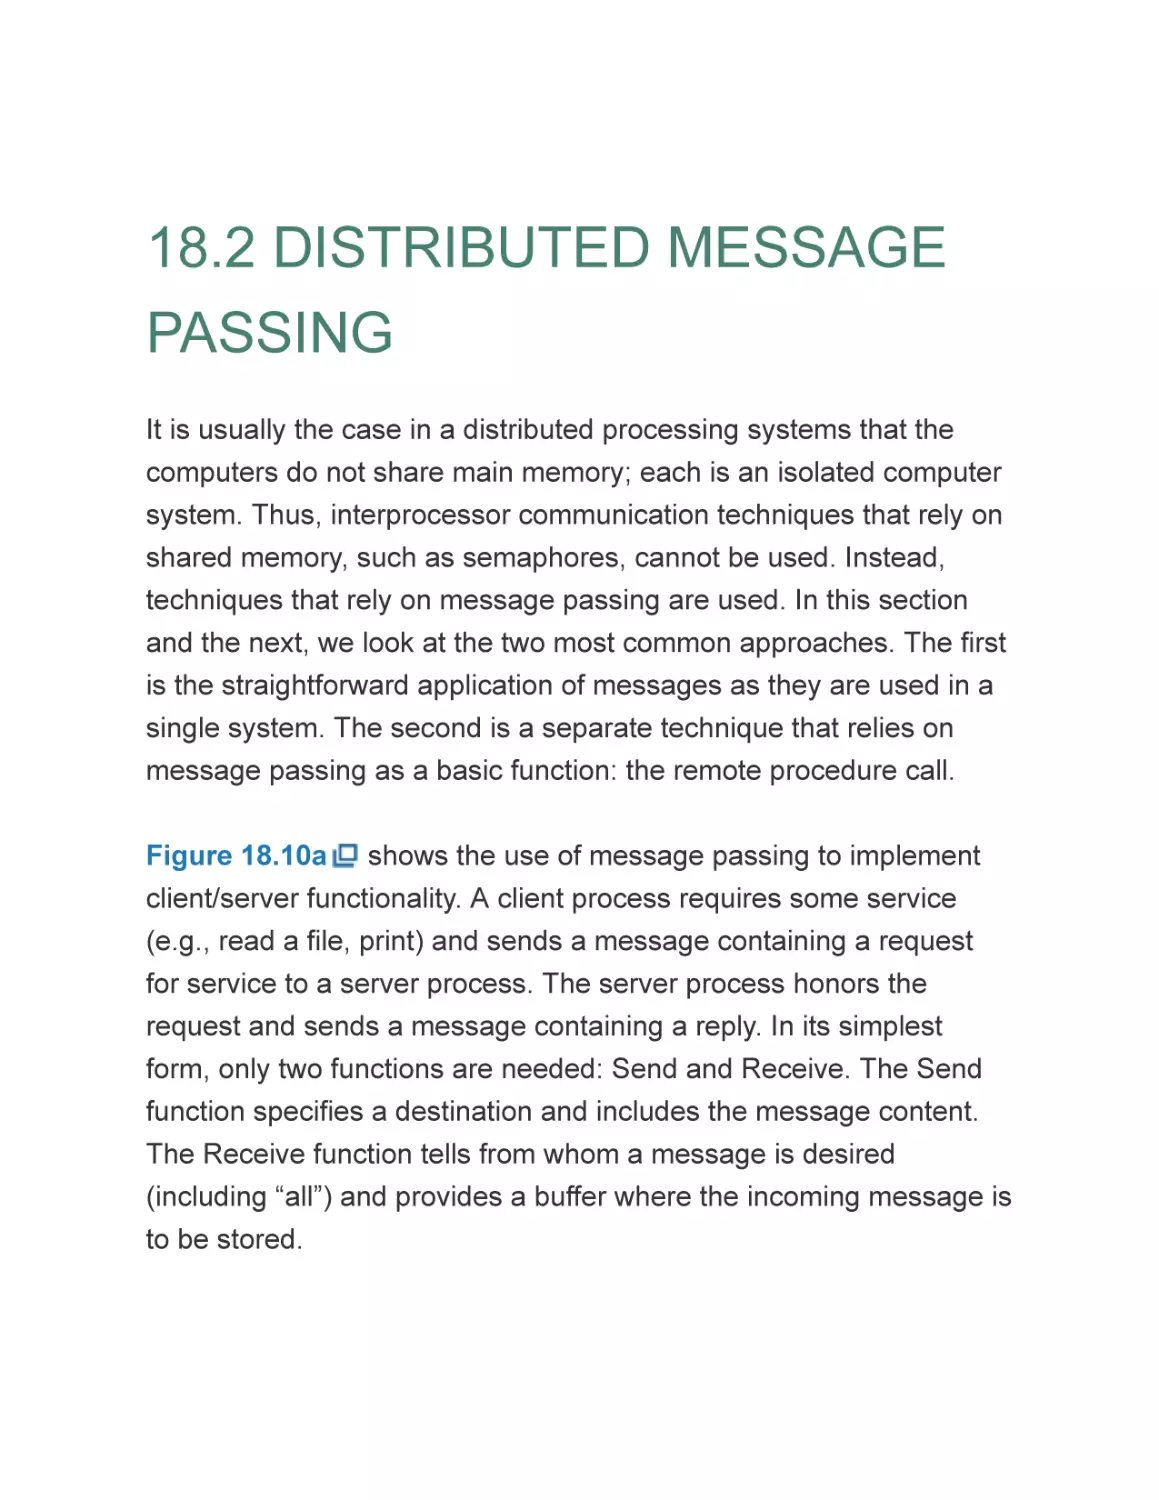 18.2 DISTRIBUTED MESSAGE PASSING